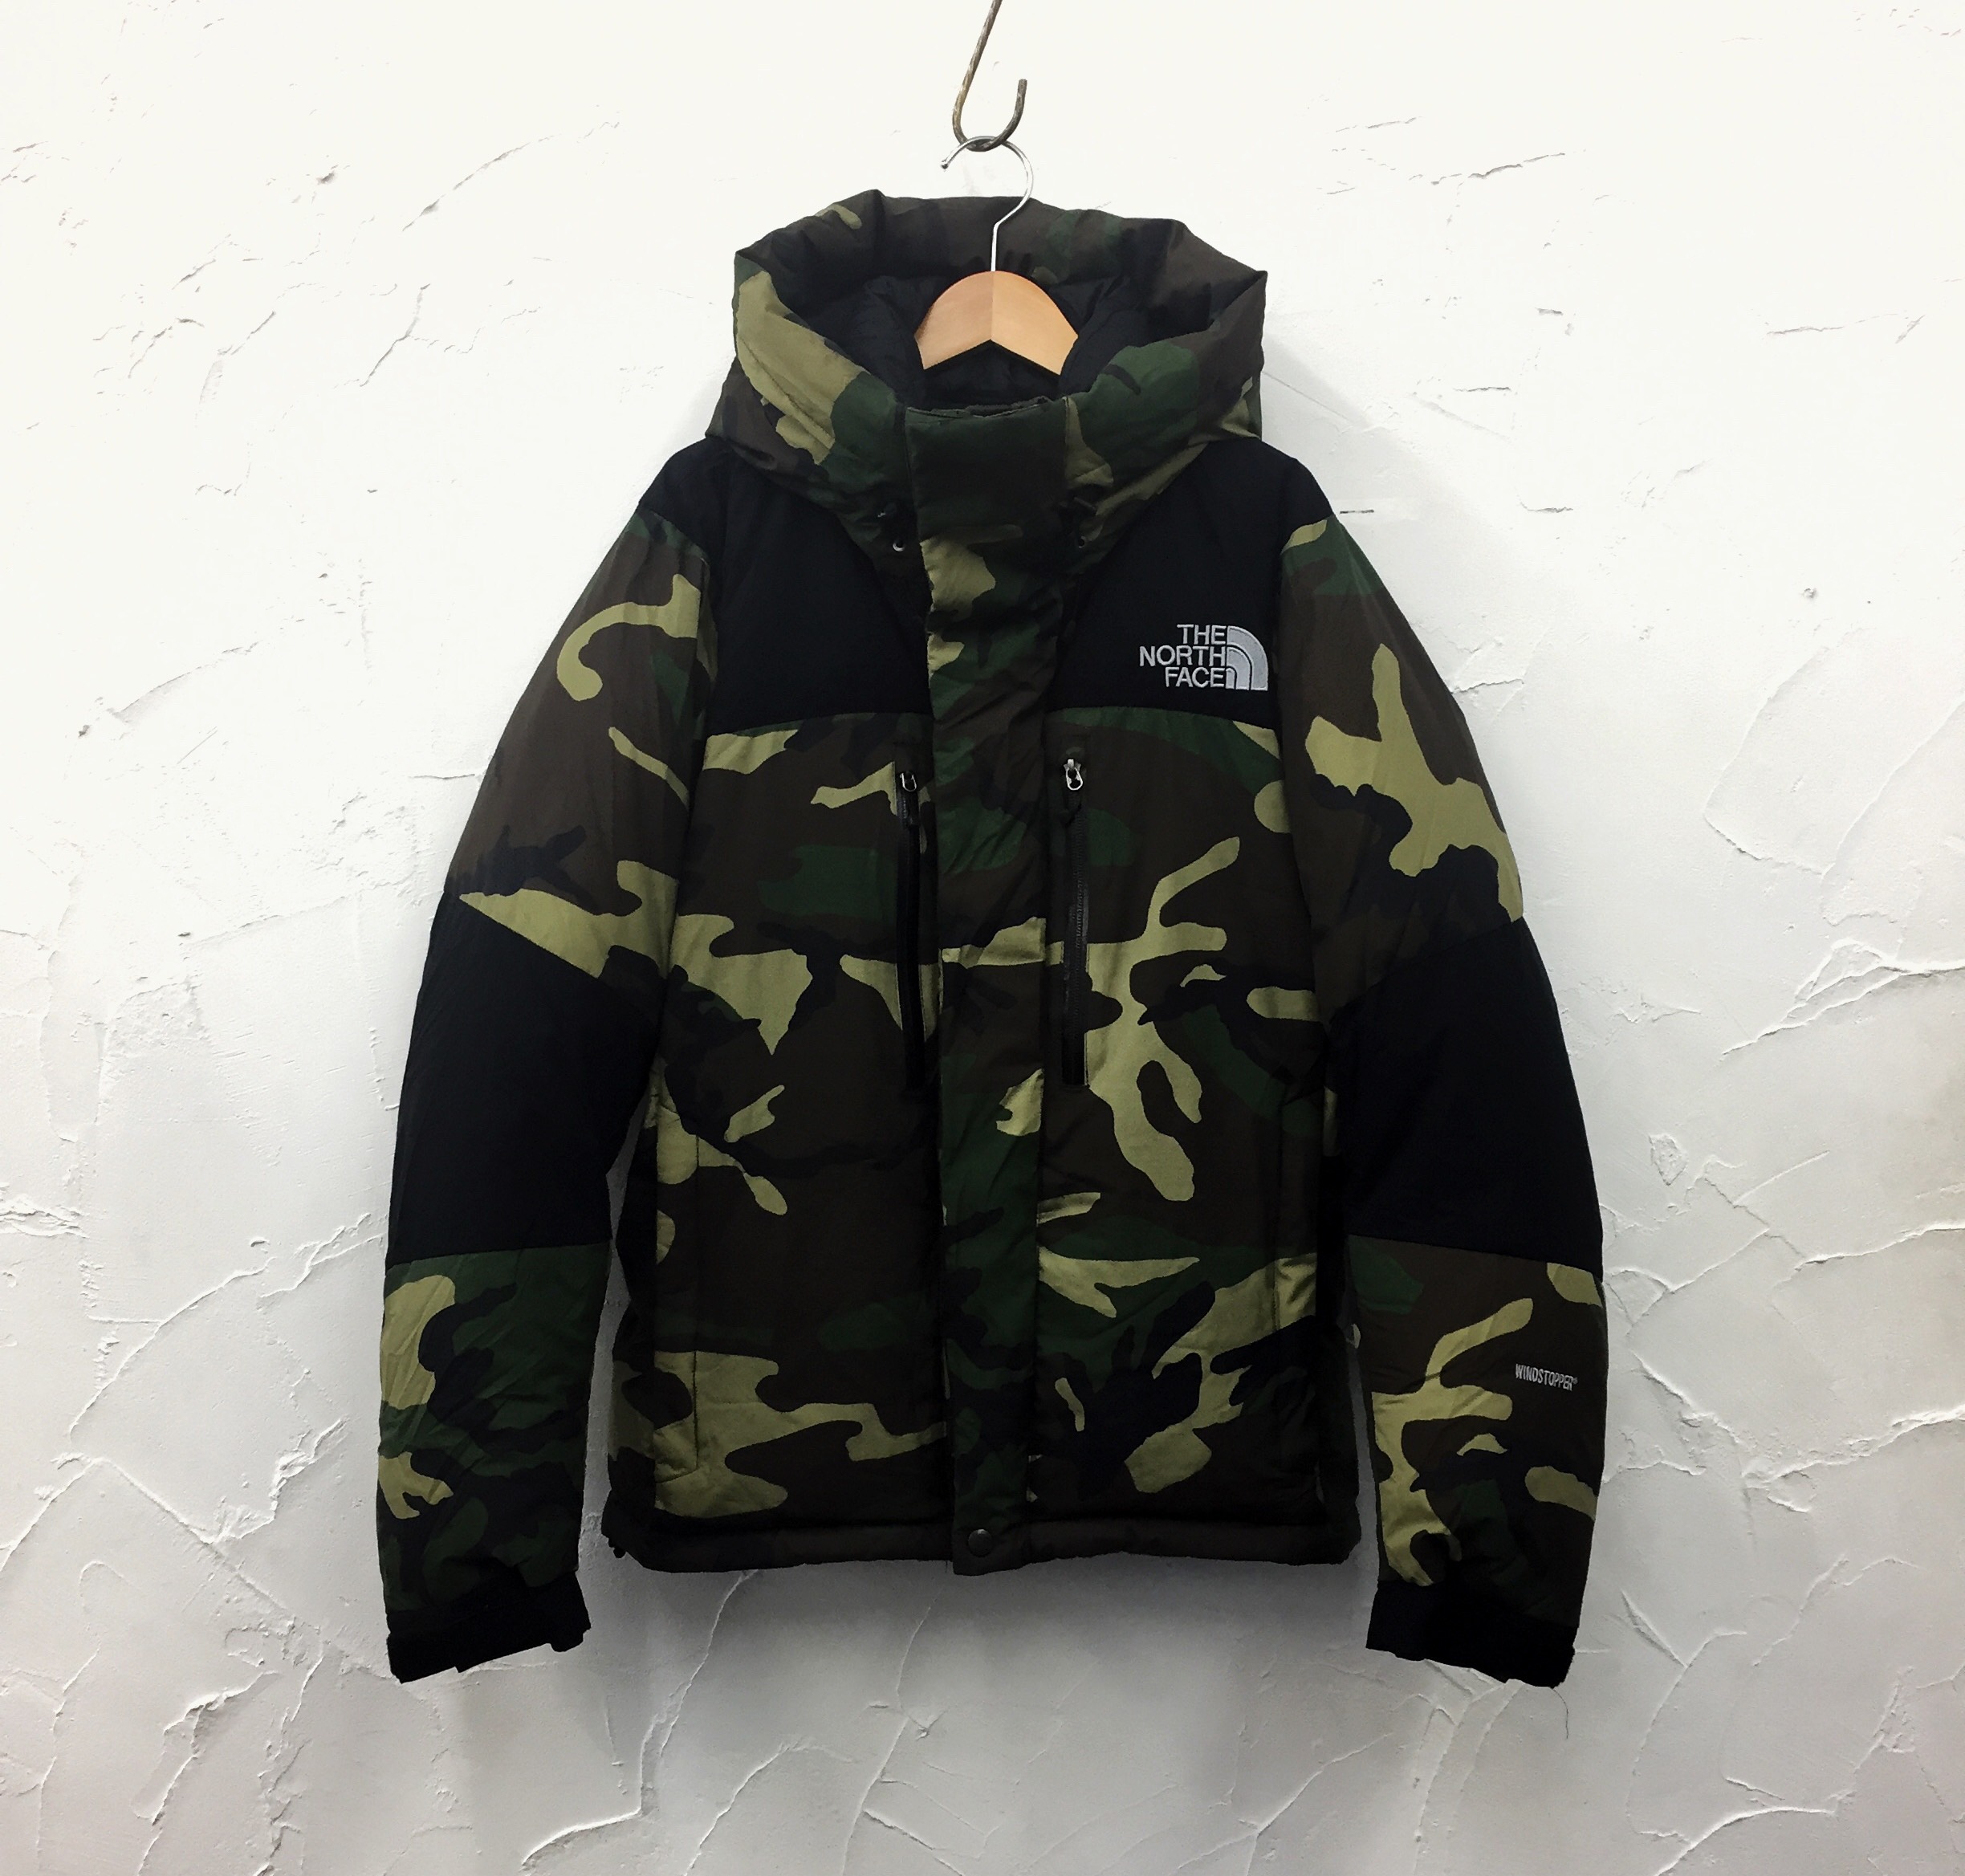 【NEW ARRIVAL】THE NORTH FACE NOVELTY BALTRO LIGHT JACKET入荷しました！！ | カインド